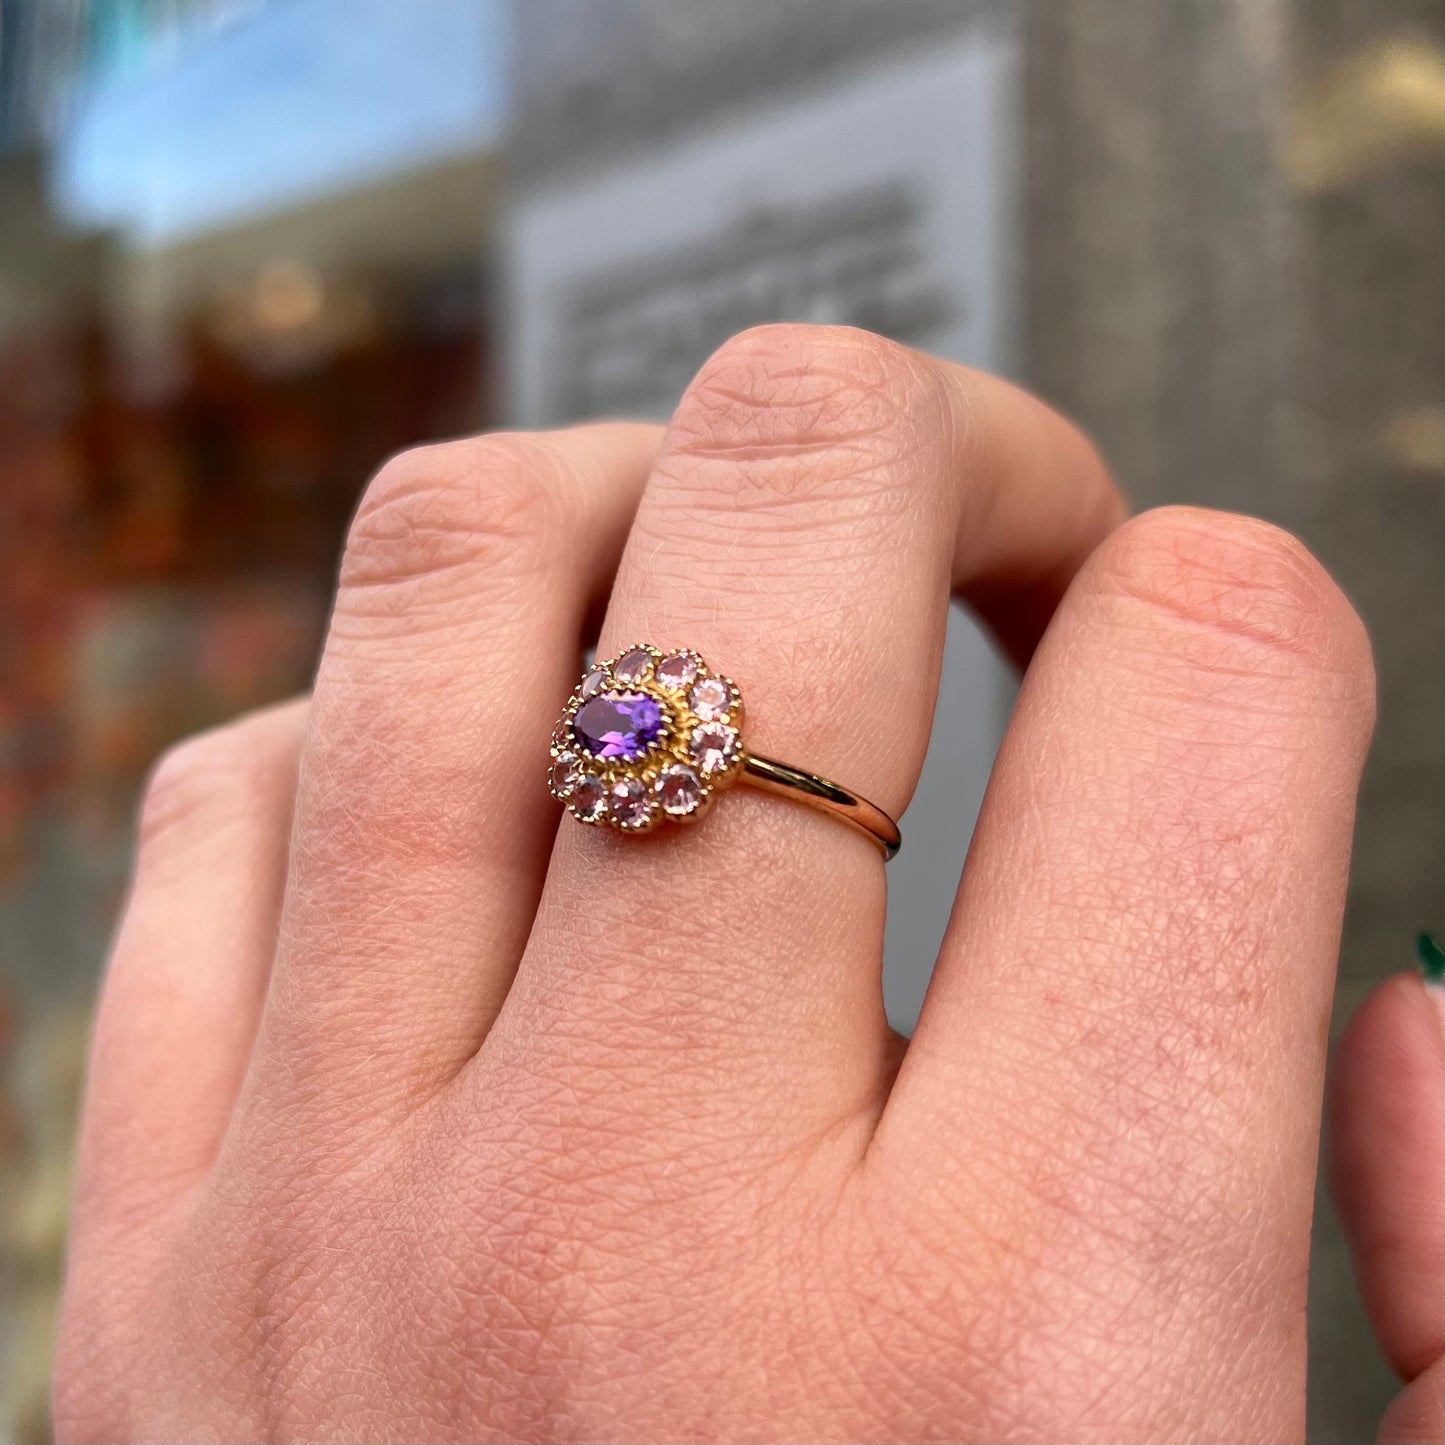 Victorian Reproduction 9ct Yellow Gold Amethyst and Diamond Floral Inspired Ring - Size M1/2